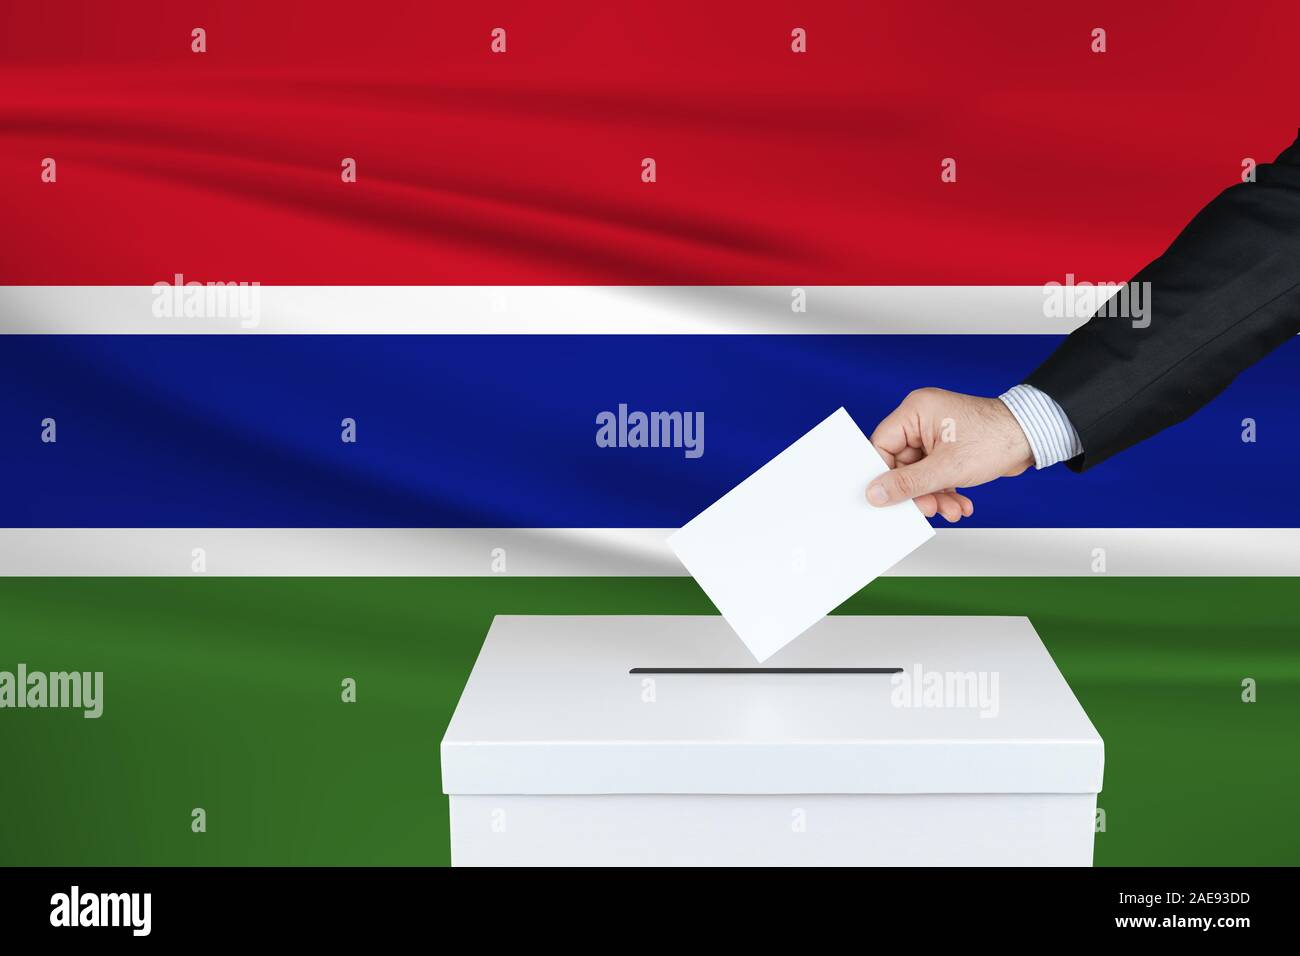 Election in Gambia. The hand of man putting his vote in the ballot box. Waved Gambia flag on background. Stock Photo